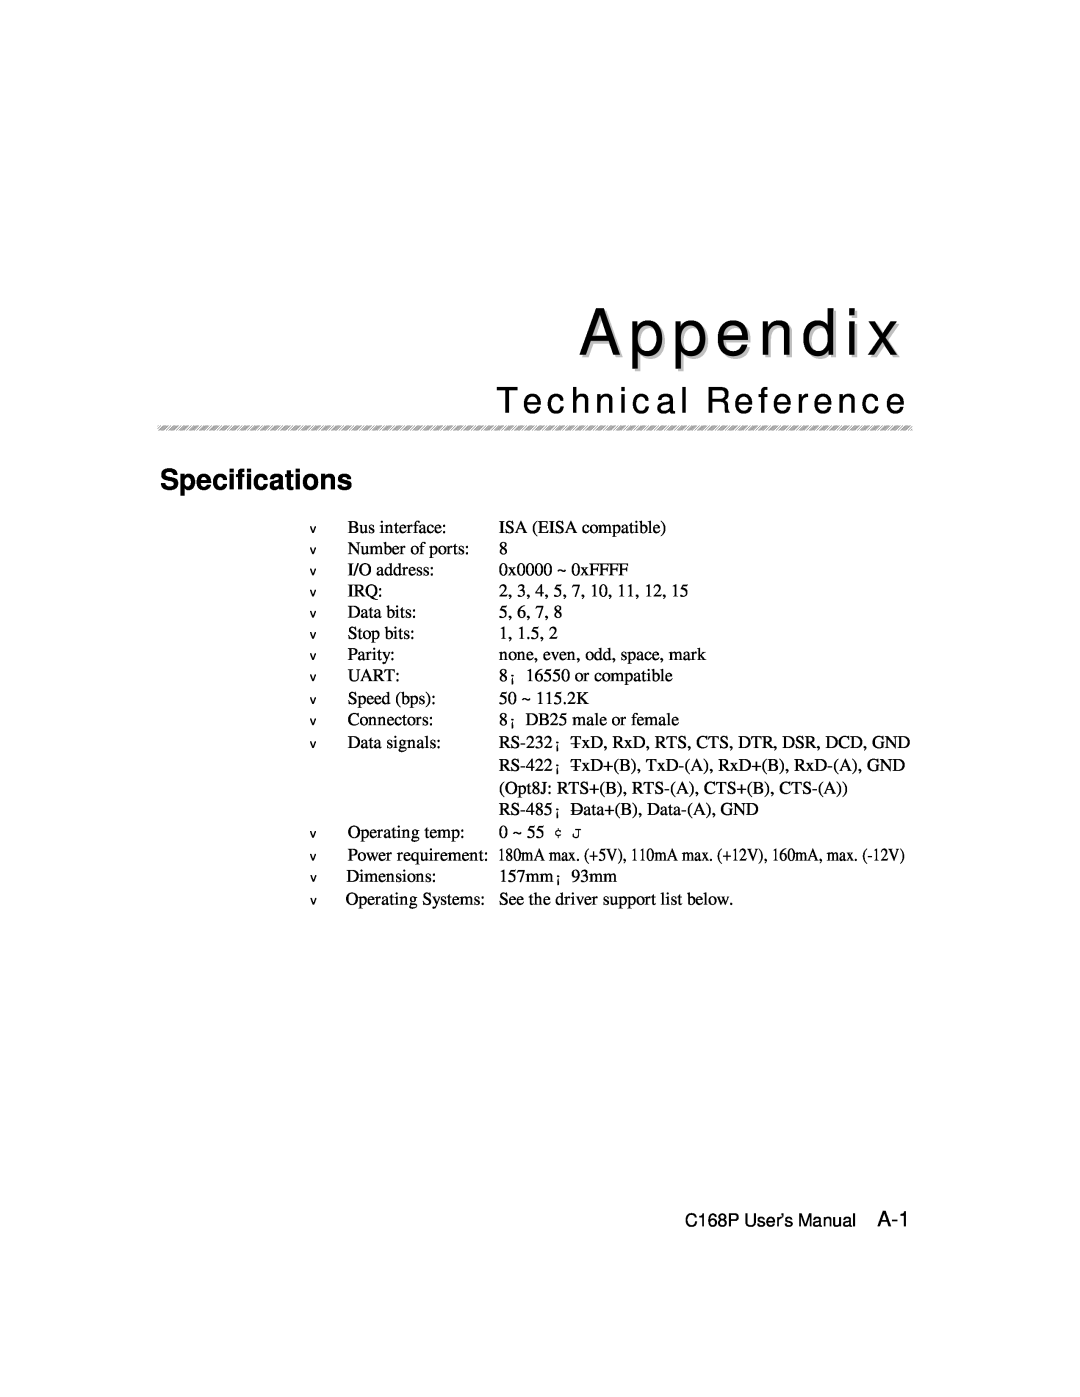 Moxa Technologies C168P user manual Technical Reference, Specifications, Appendix 